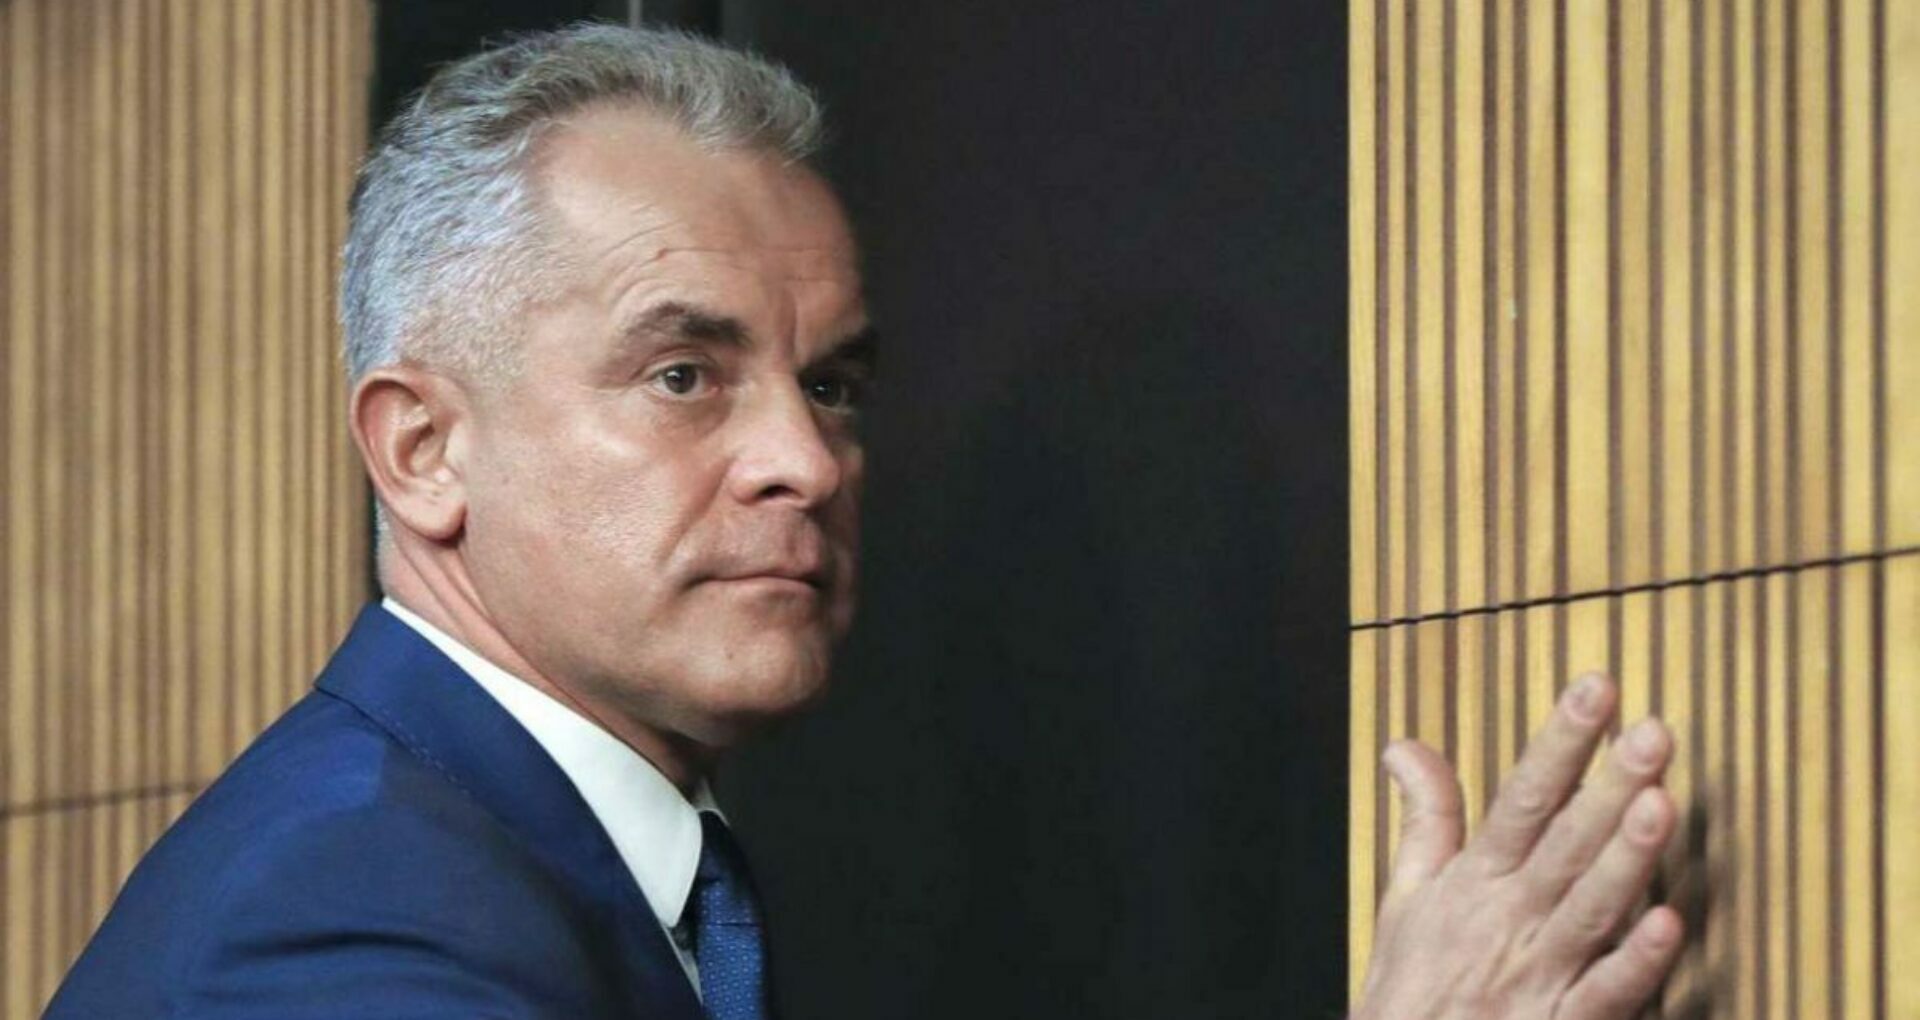 The Moldovan Authorities Announce the Former Leader of the Democrat Party Vladimir Plahotniuc Left Turkey’s Territory